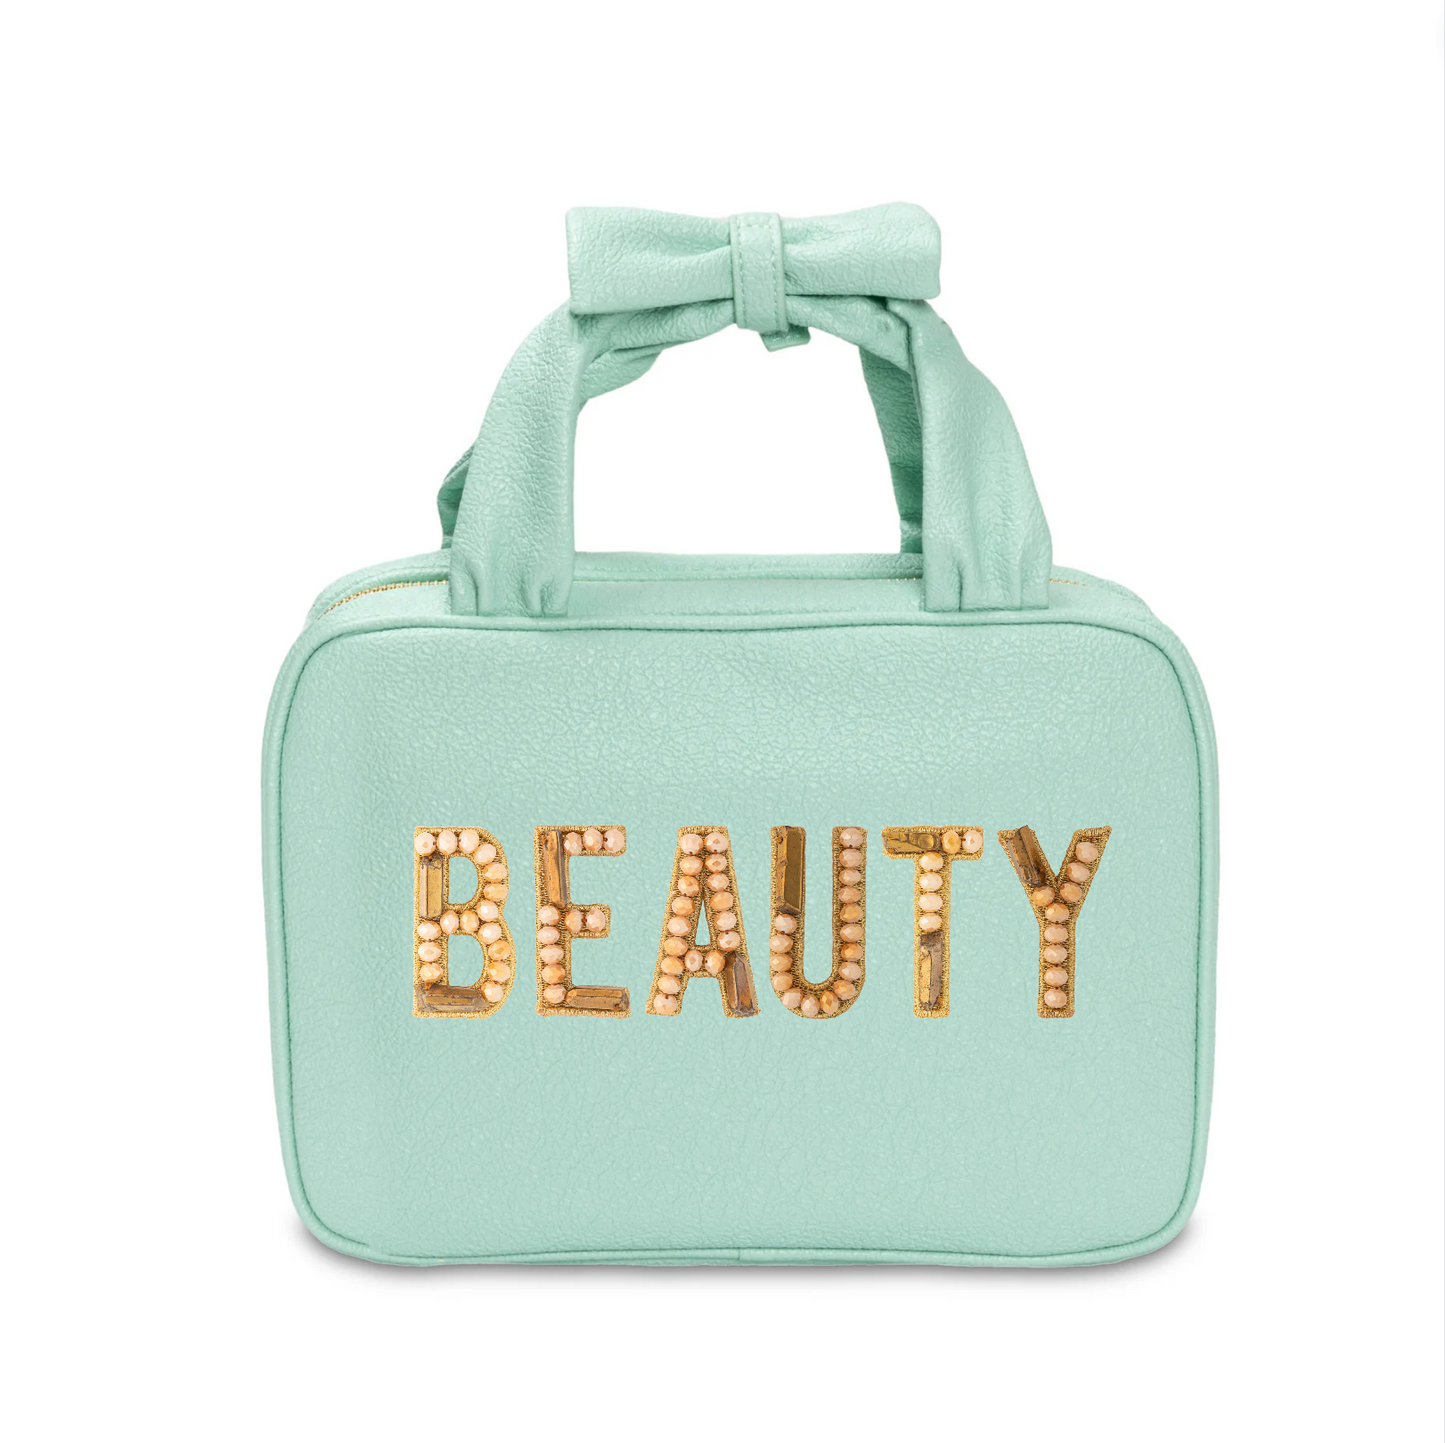 Beauty Toiletry Suitcase